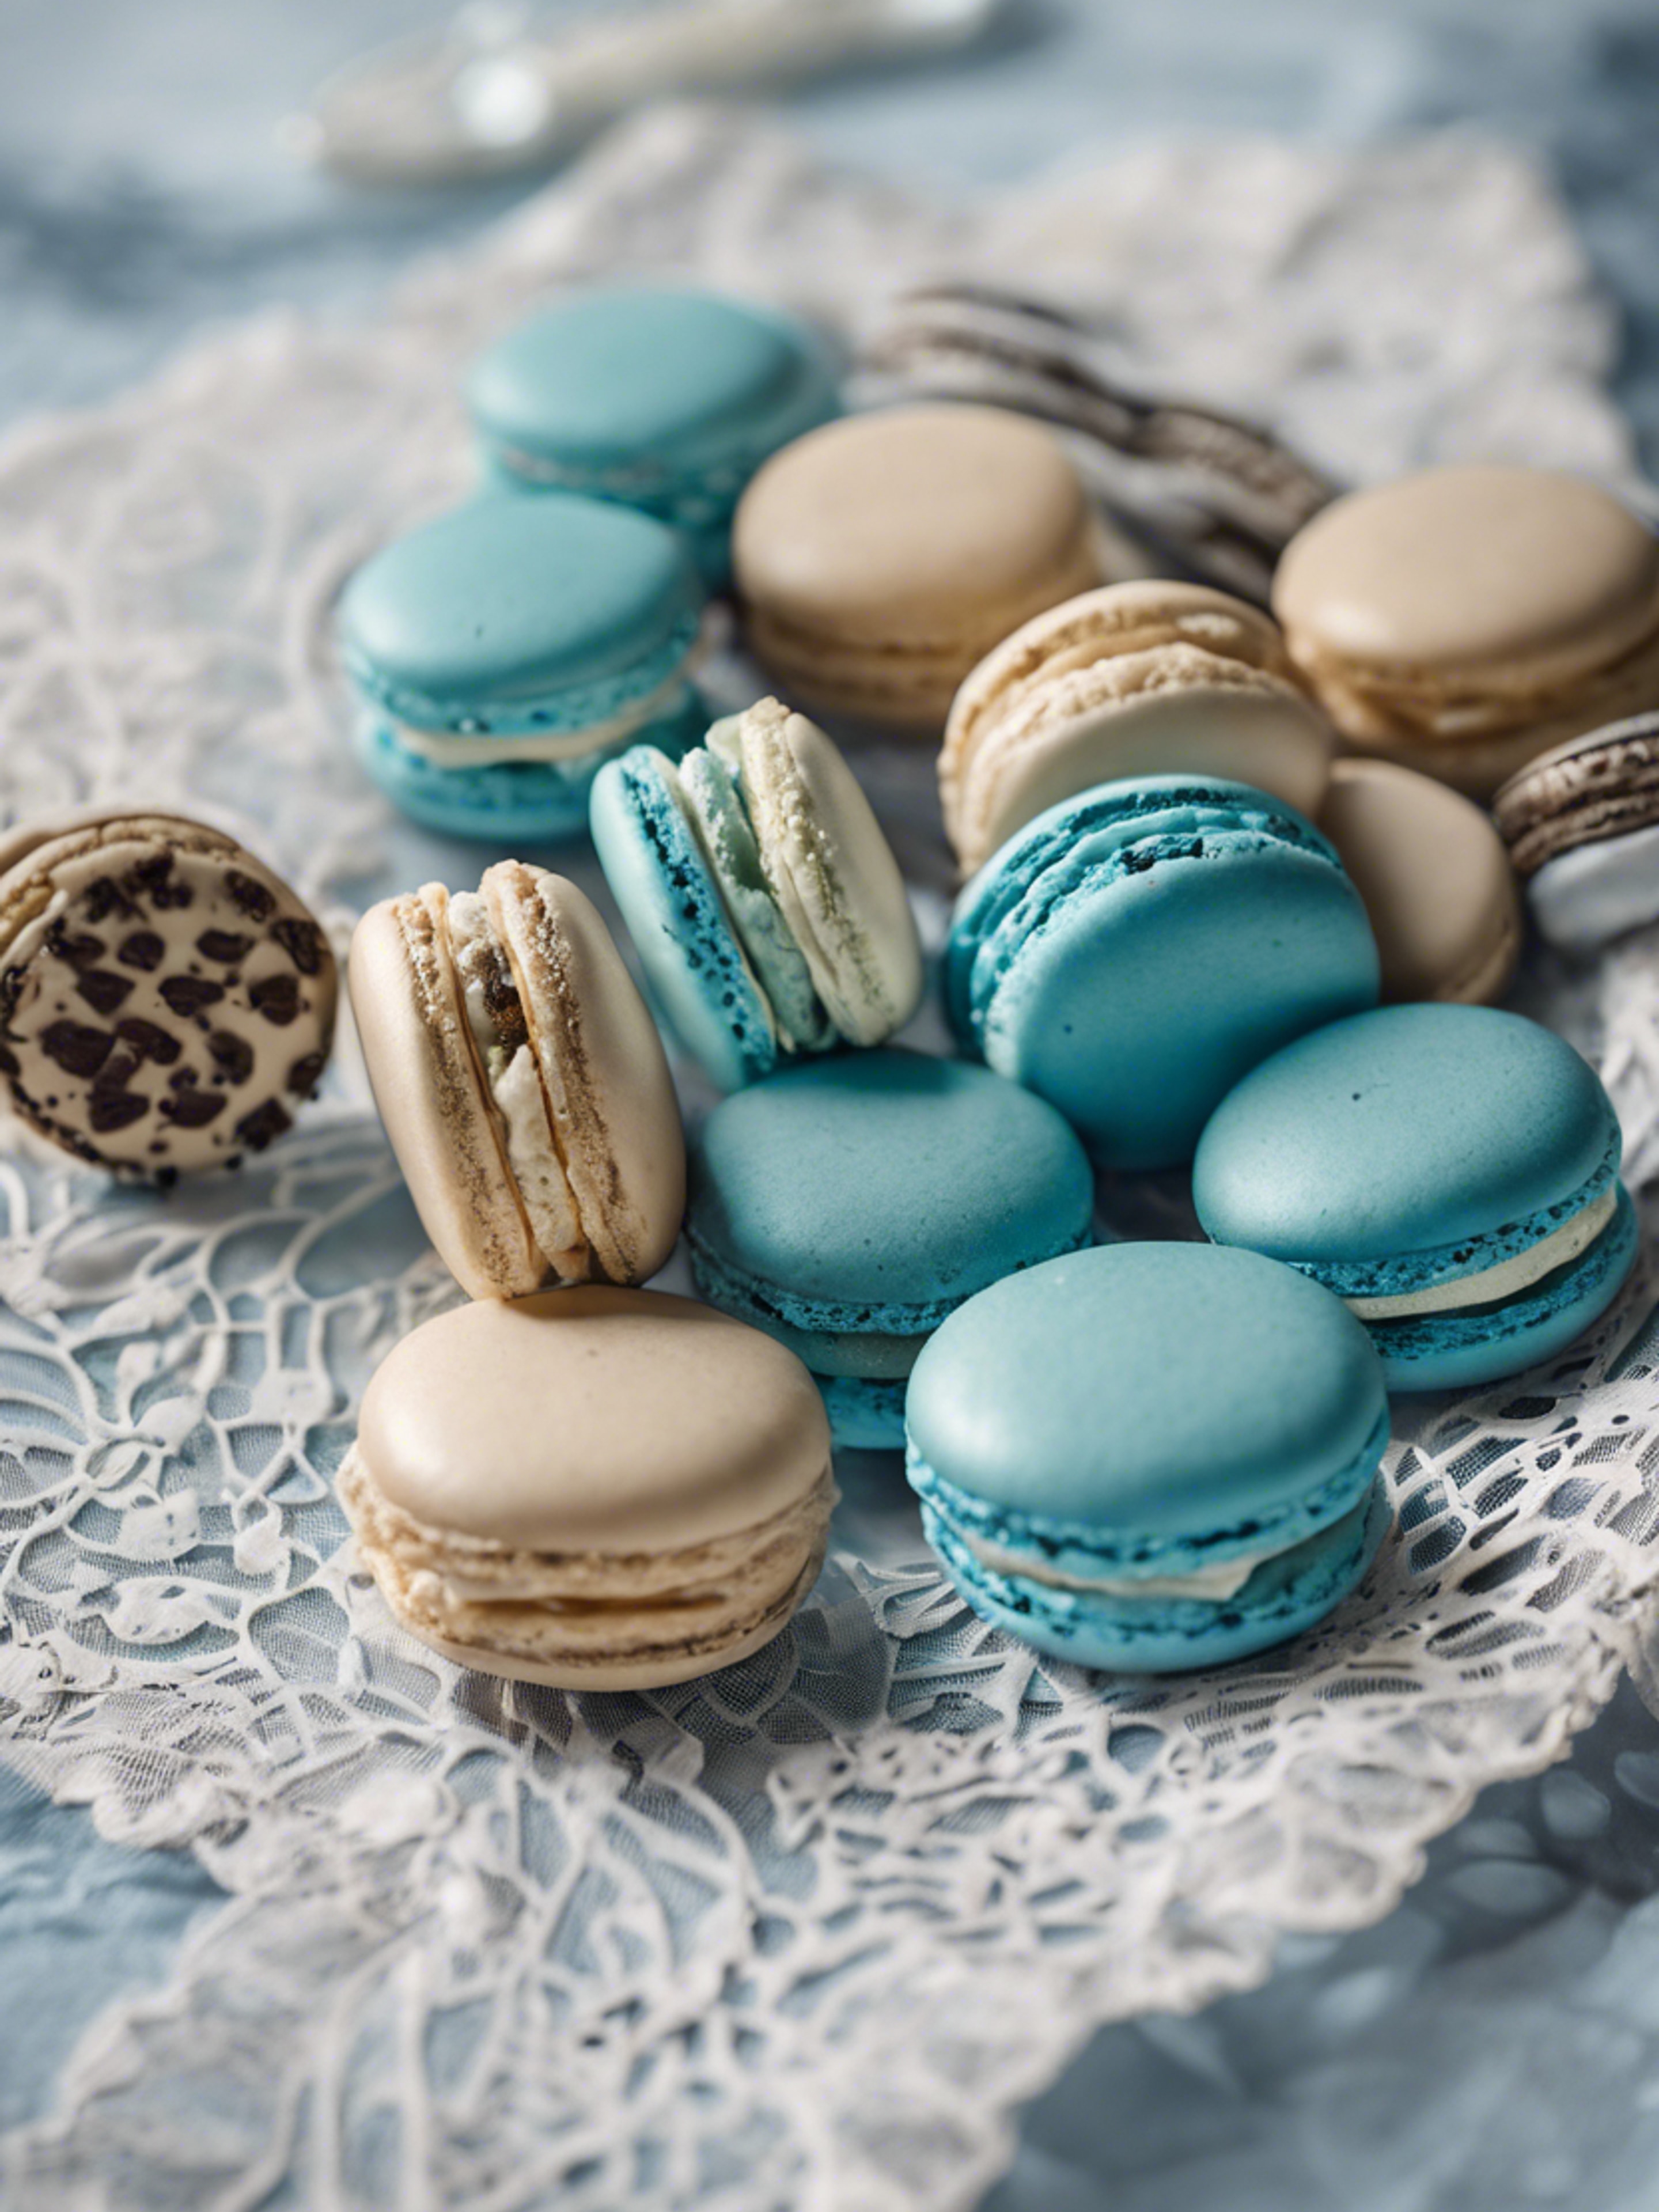 Blue French Macarons artistically arranged on an antique white lace tablecloth. Tapet[73469cabdbbf44728762]